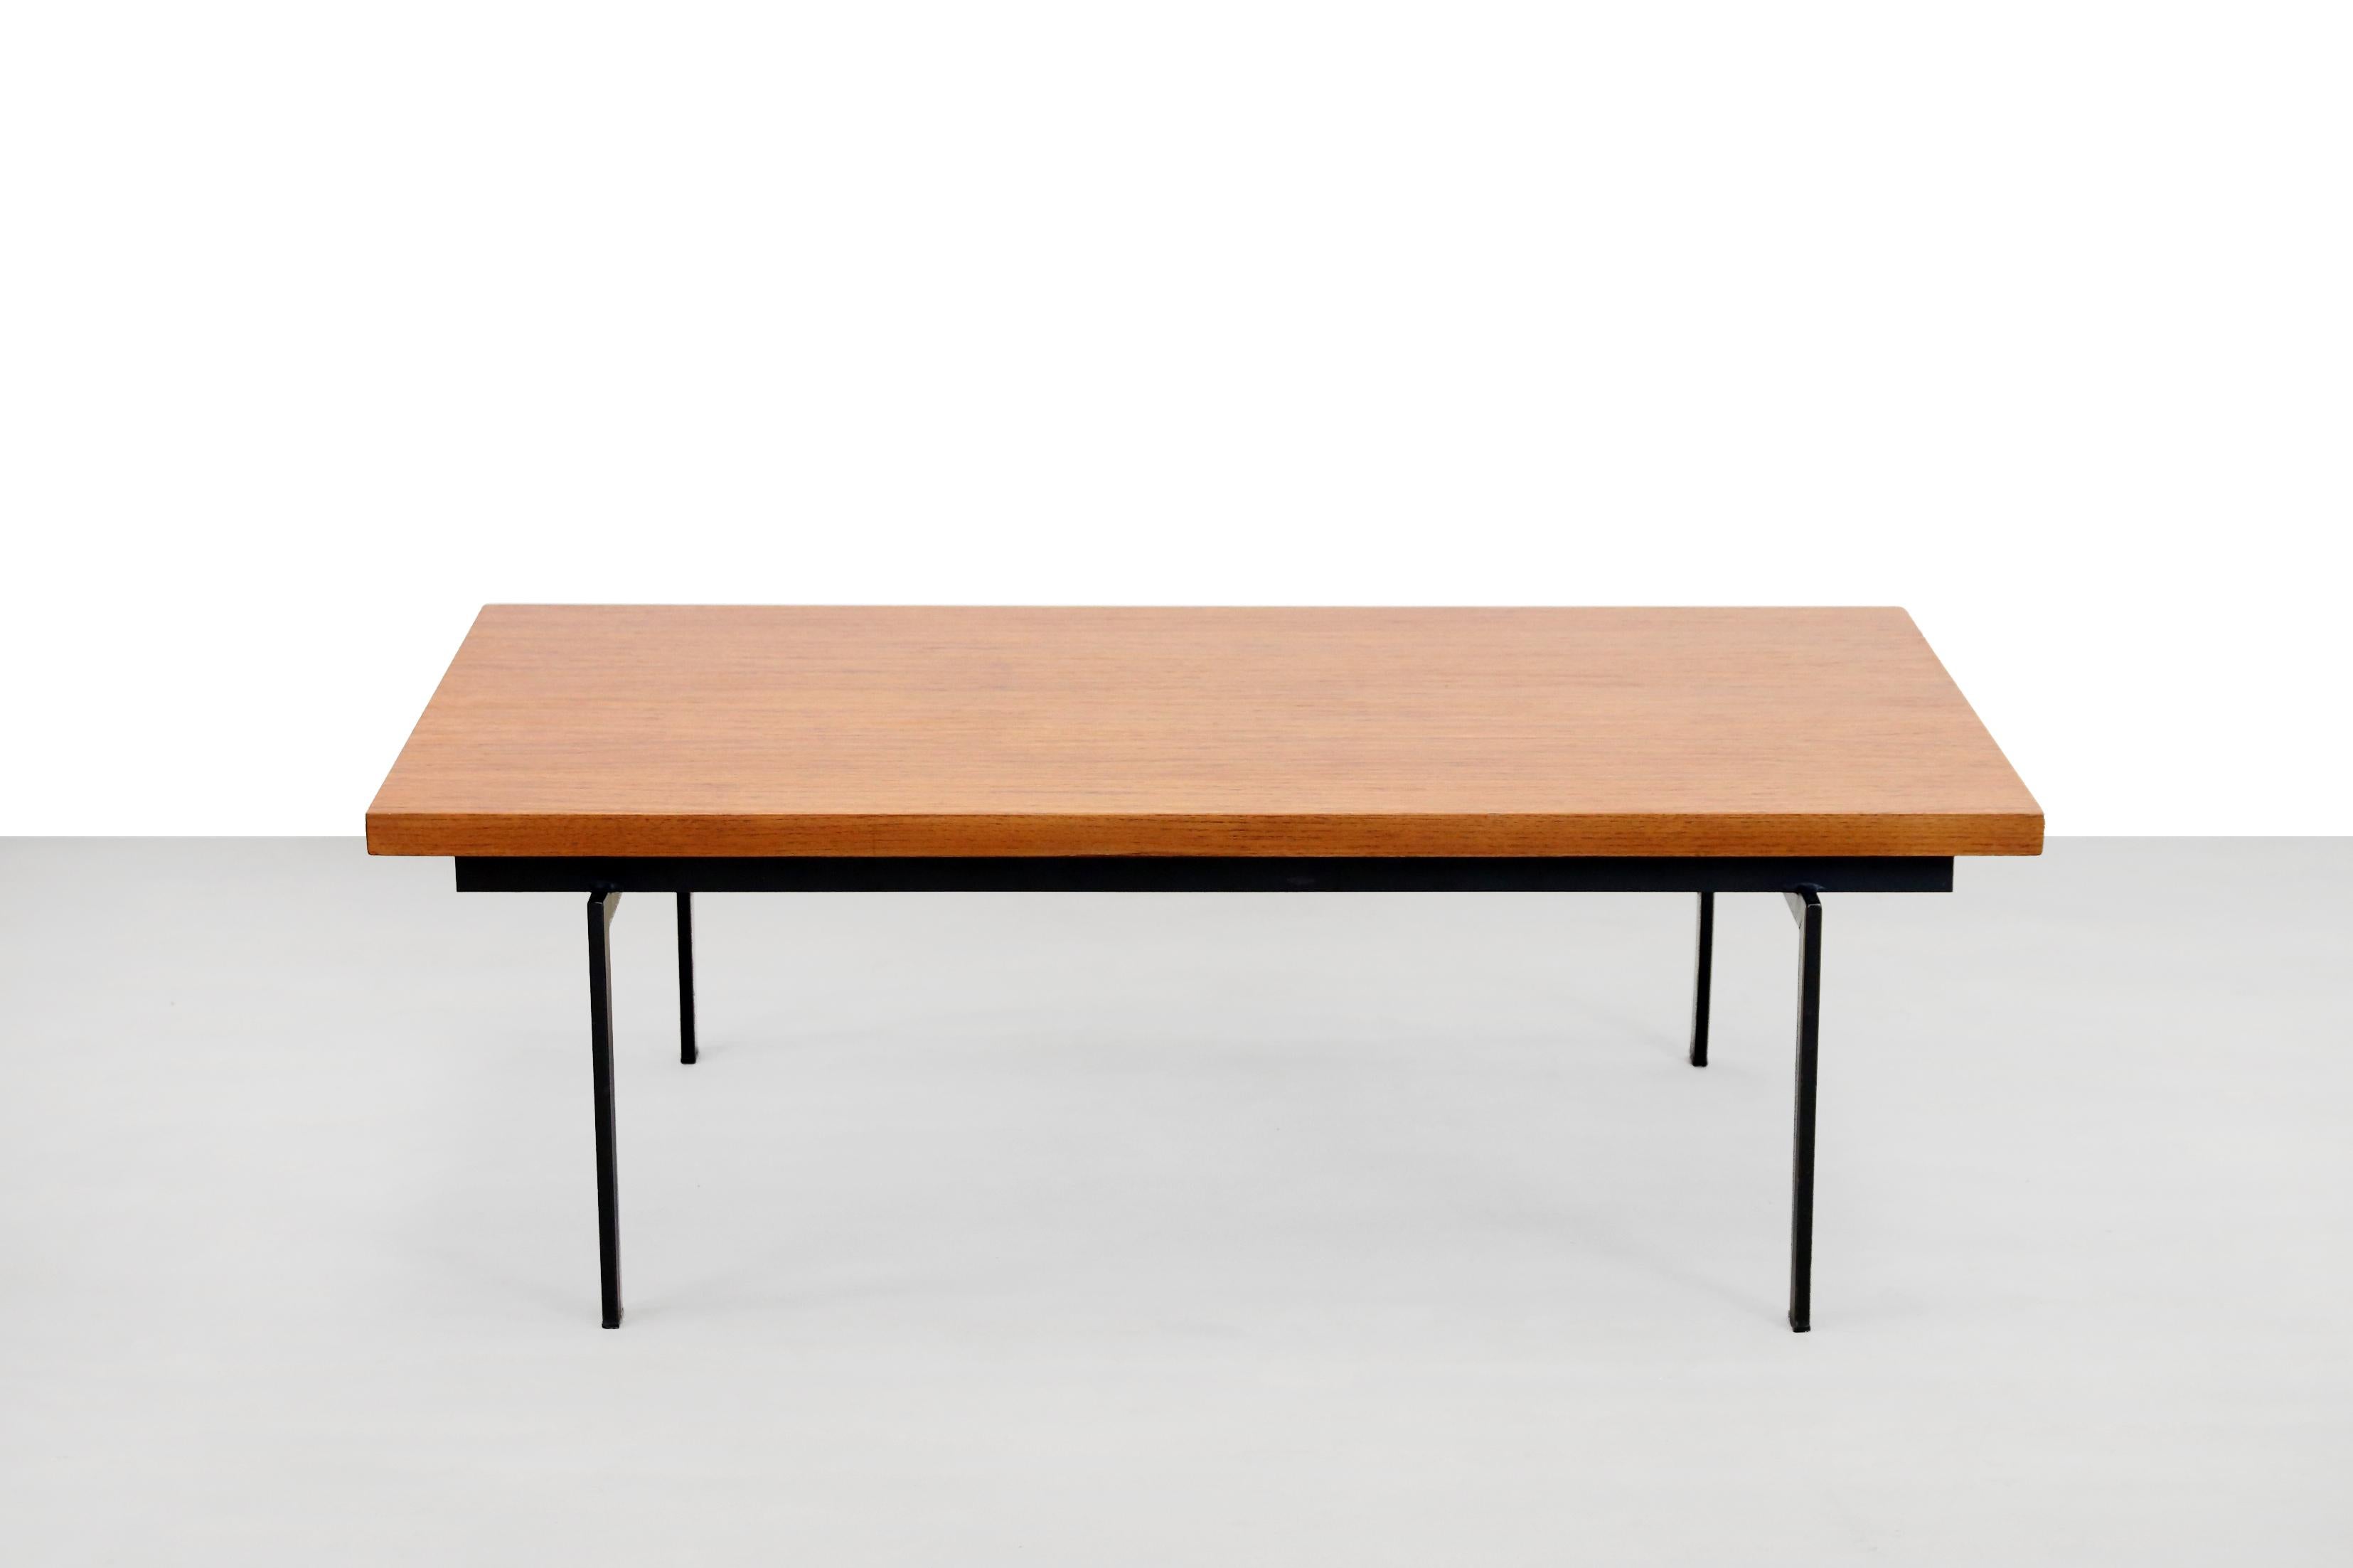 Beautiful vintage teak coffee table with metal base designed by Cees Braakman for Pastoe in the early 1960s. This table comes from the U + N series, which is also known as the Japanese series. The table top is teak veneered and is attached to the